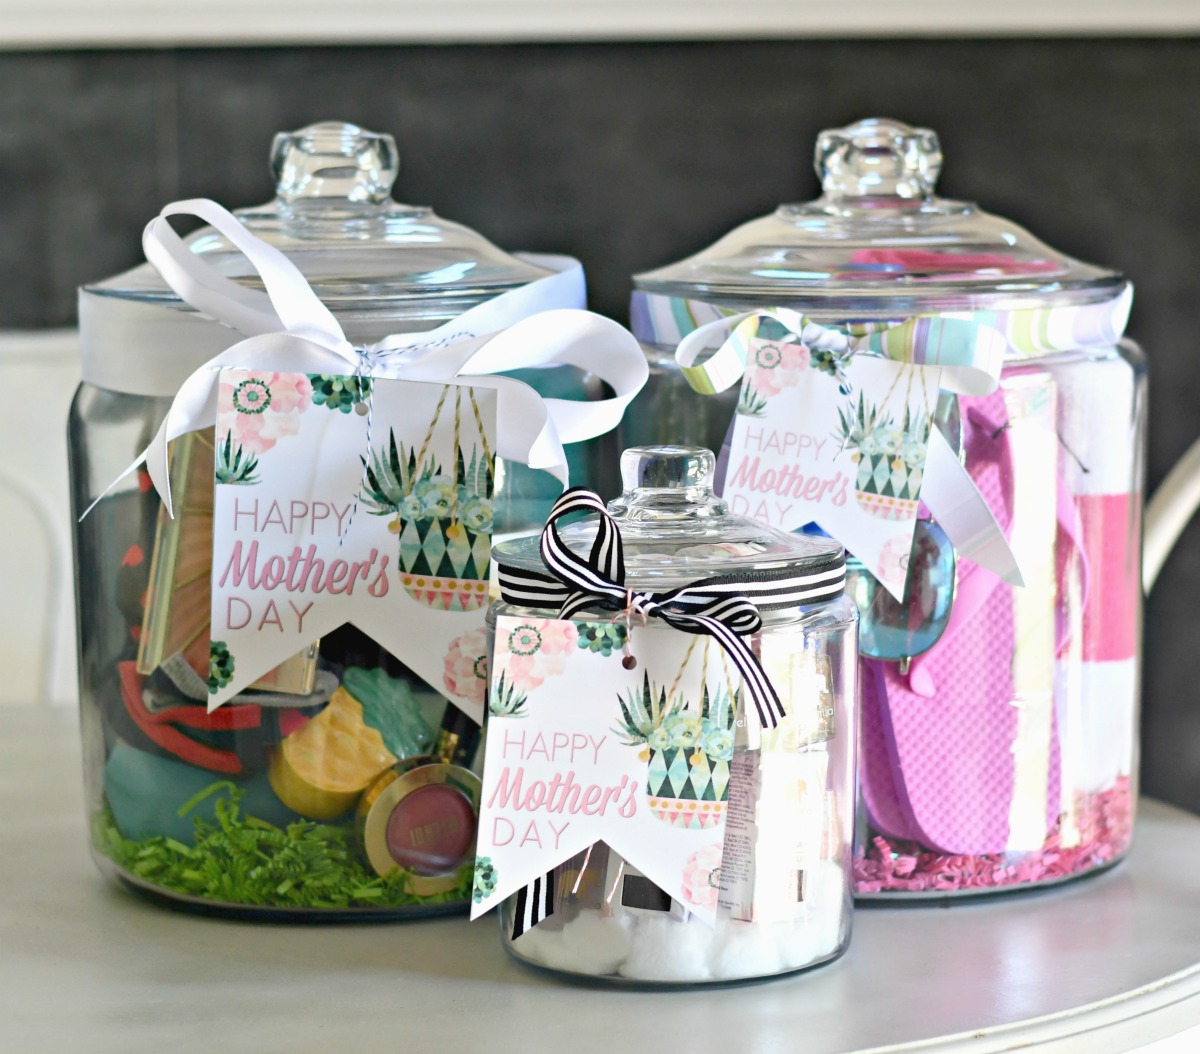 3 different diy mother's day gifts in a jar on the table